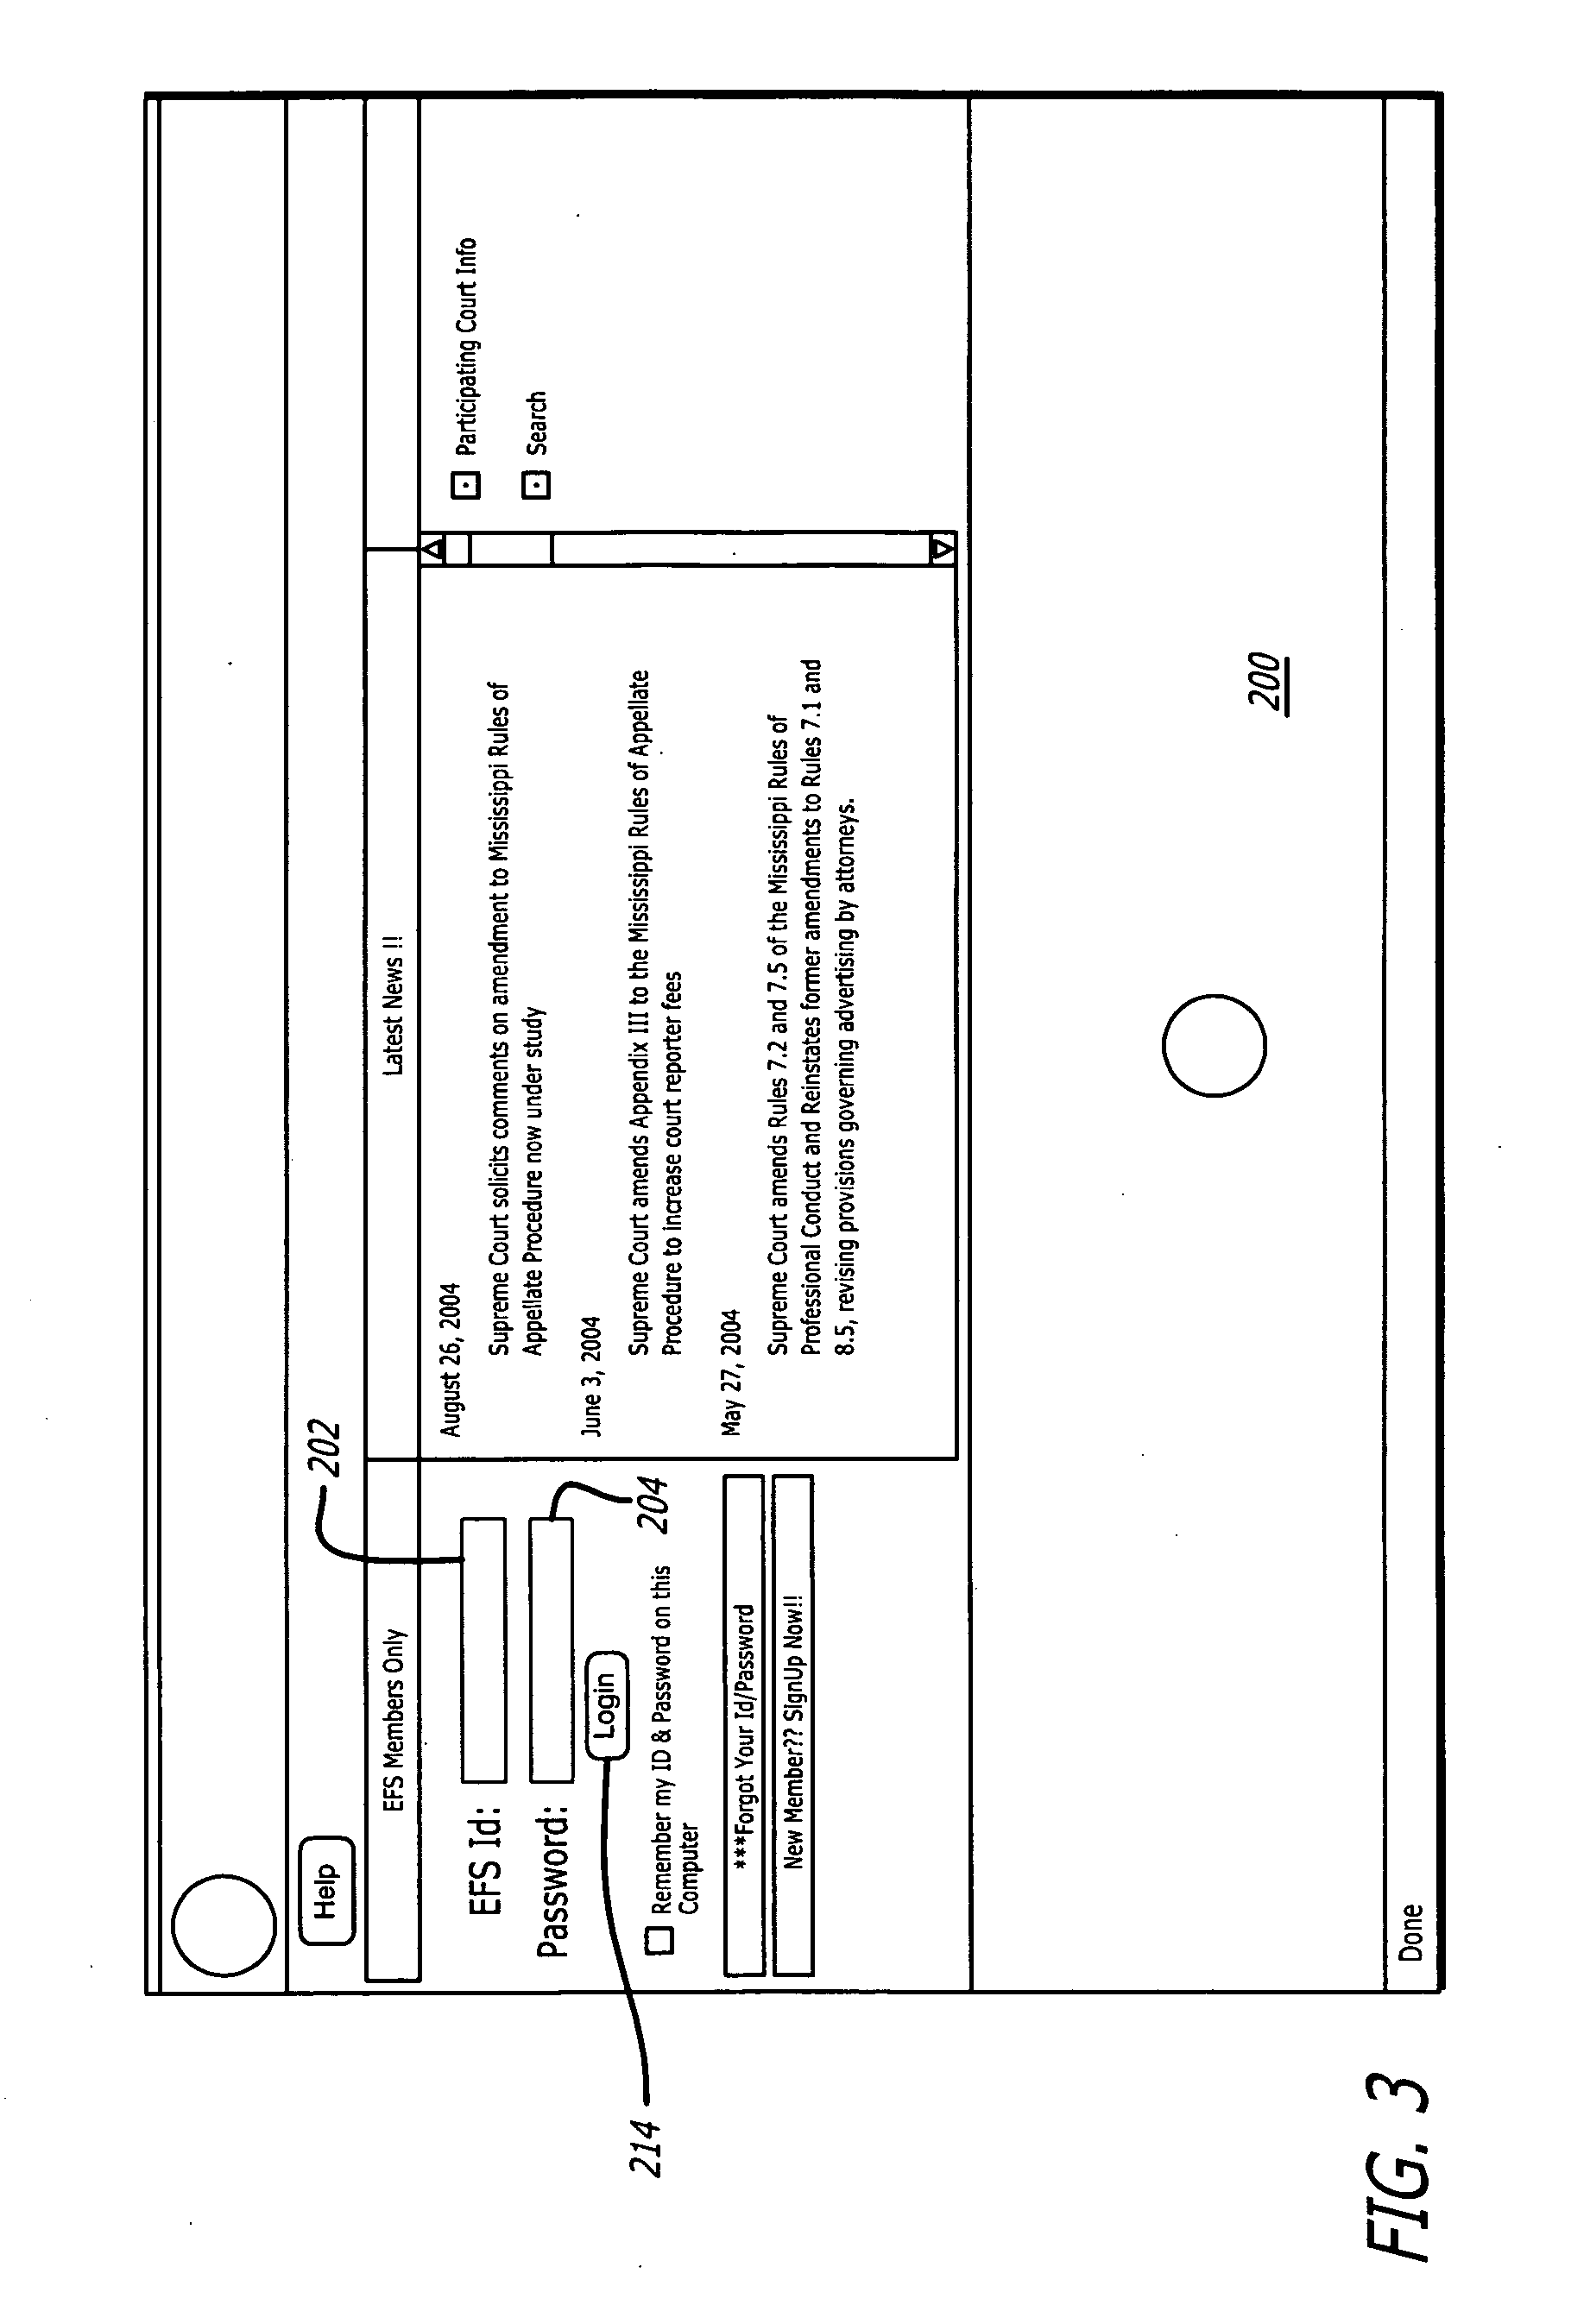 Court electronic filing system